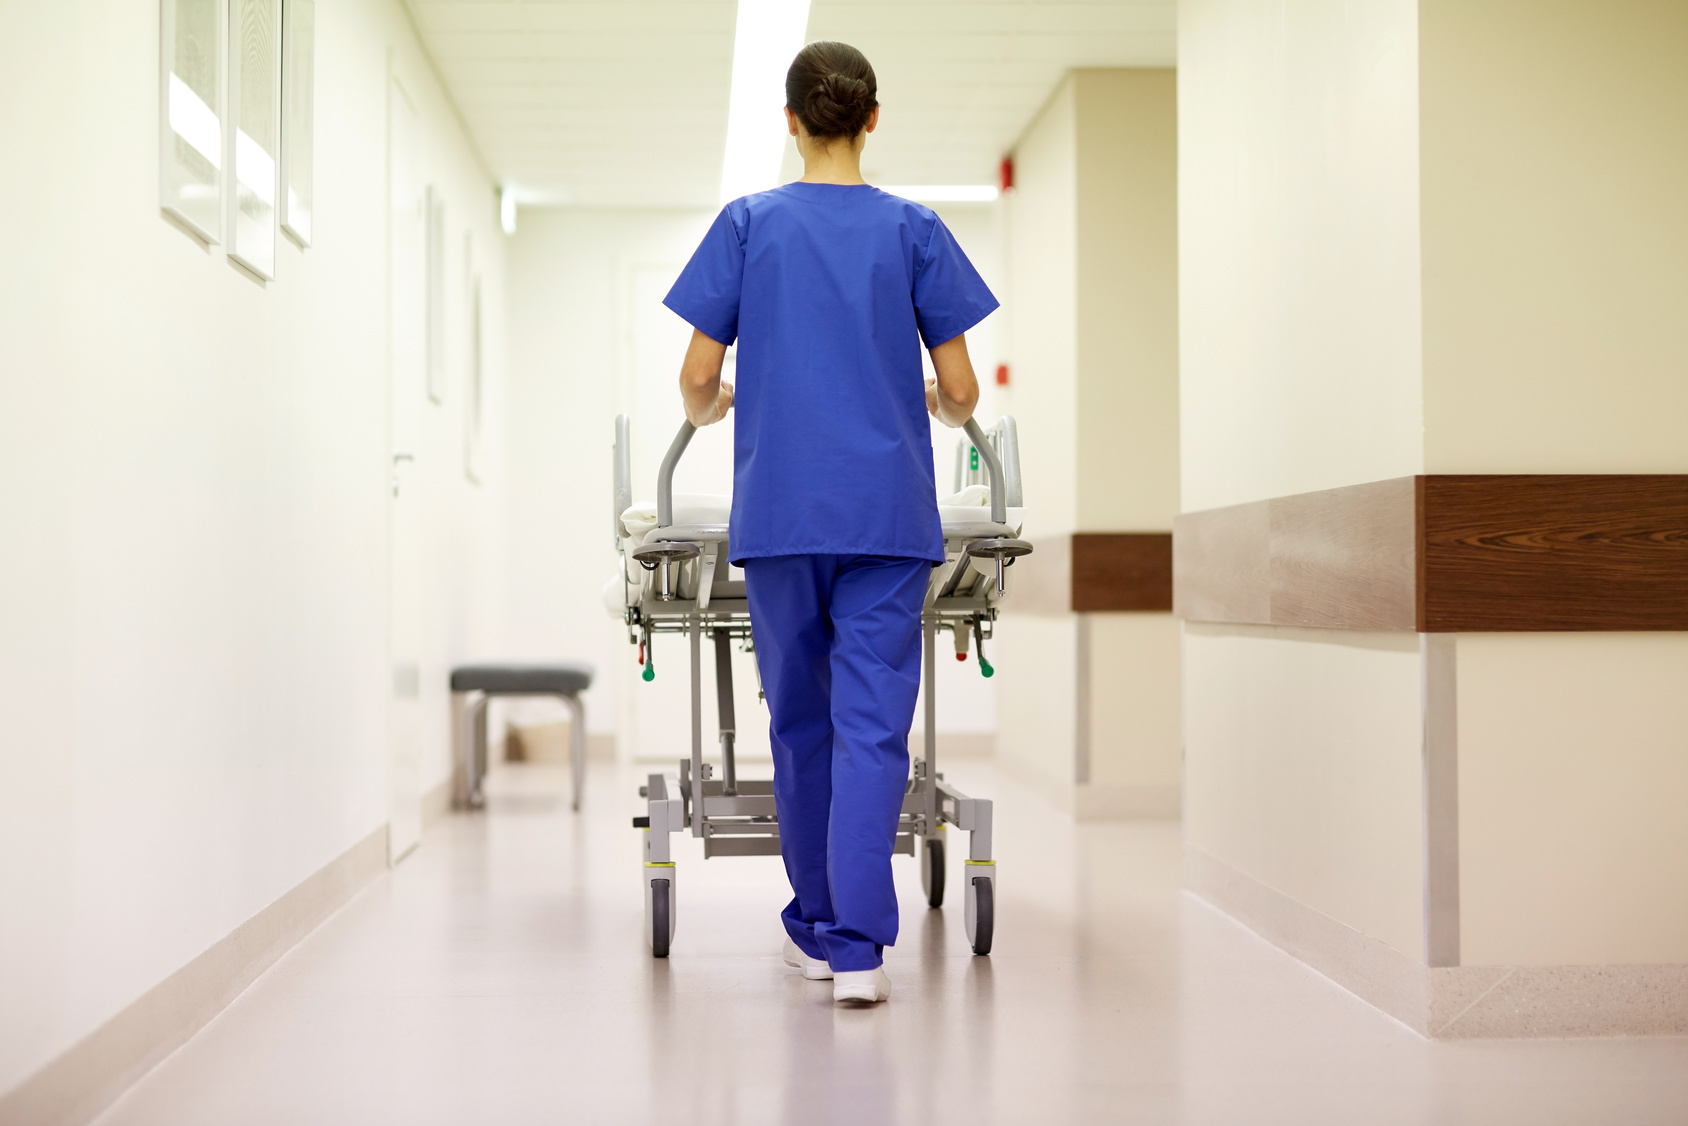 3 States with the Most Demand for Nurses